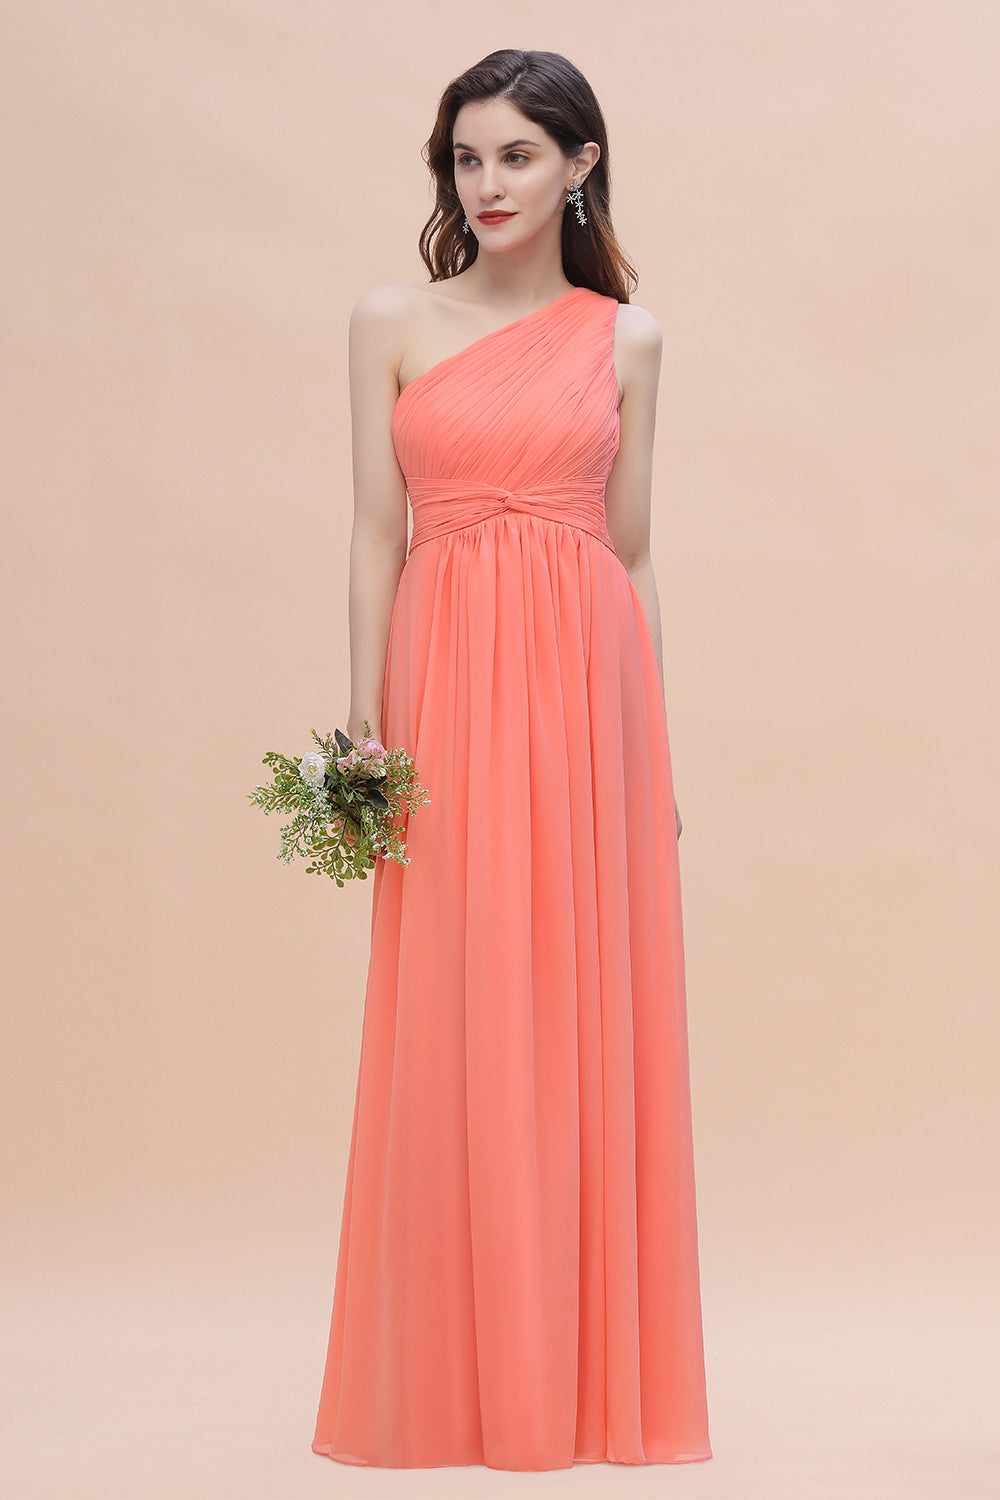 Chic One-Shoulder Ruffles Chiffon Coral Bridesmaid Dresses On Sale